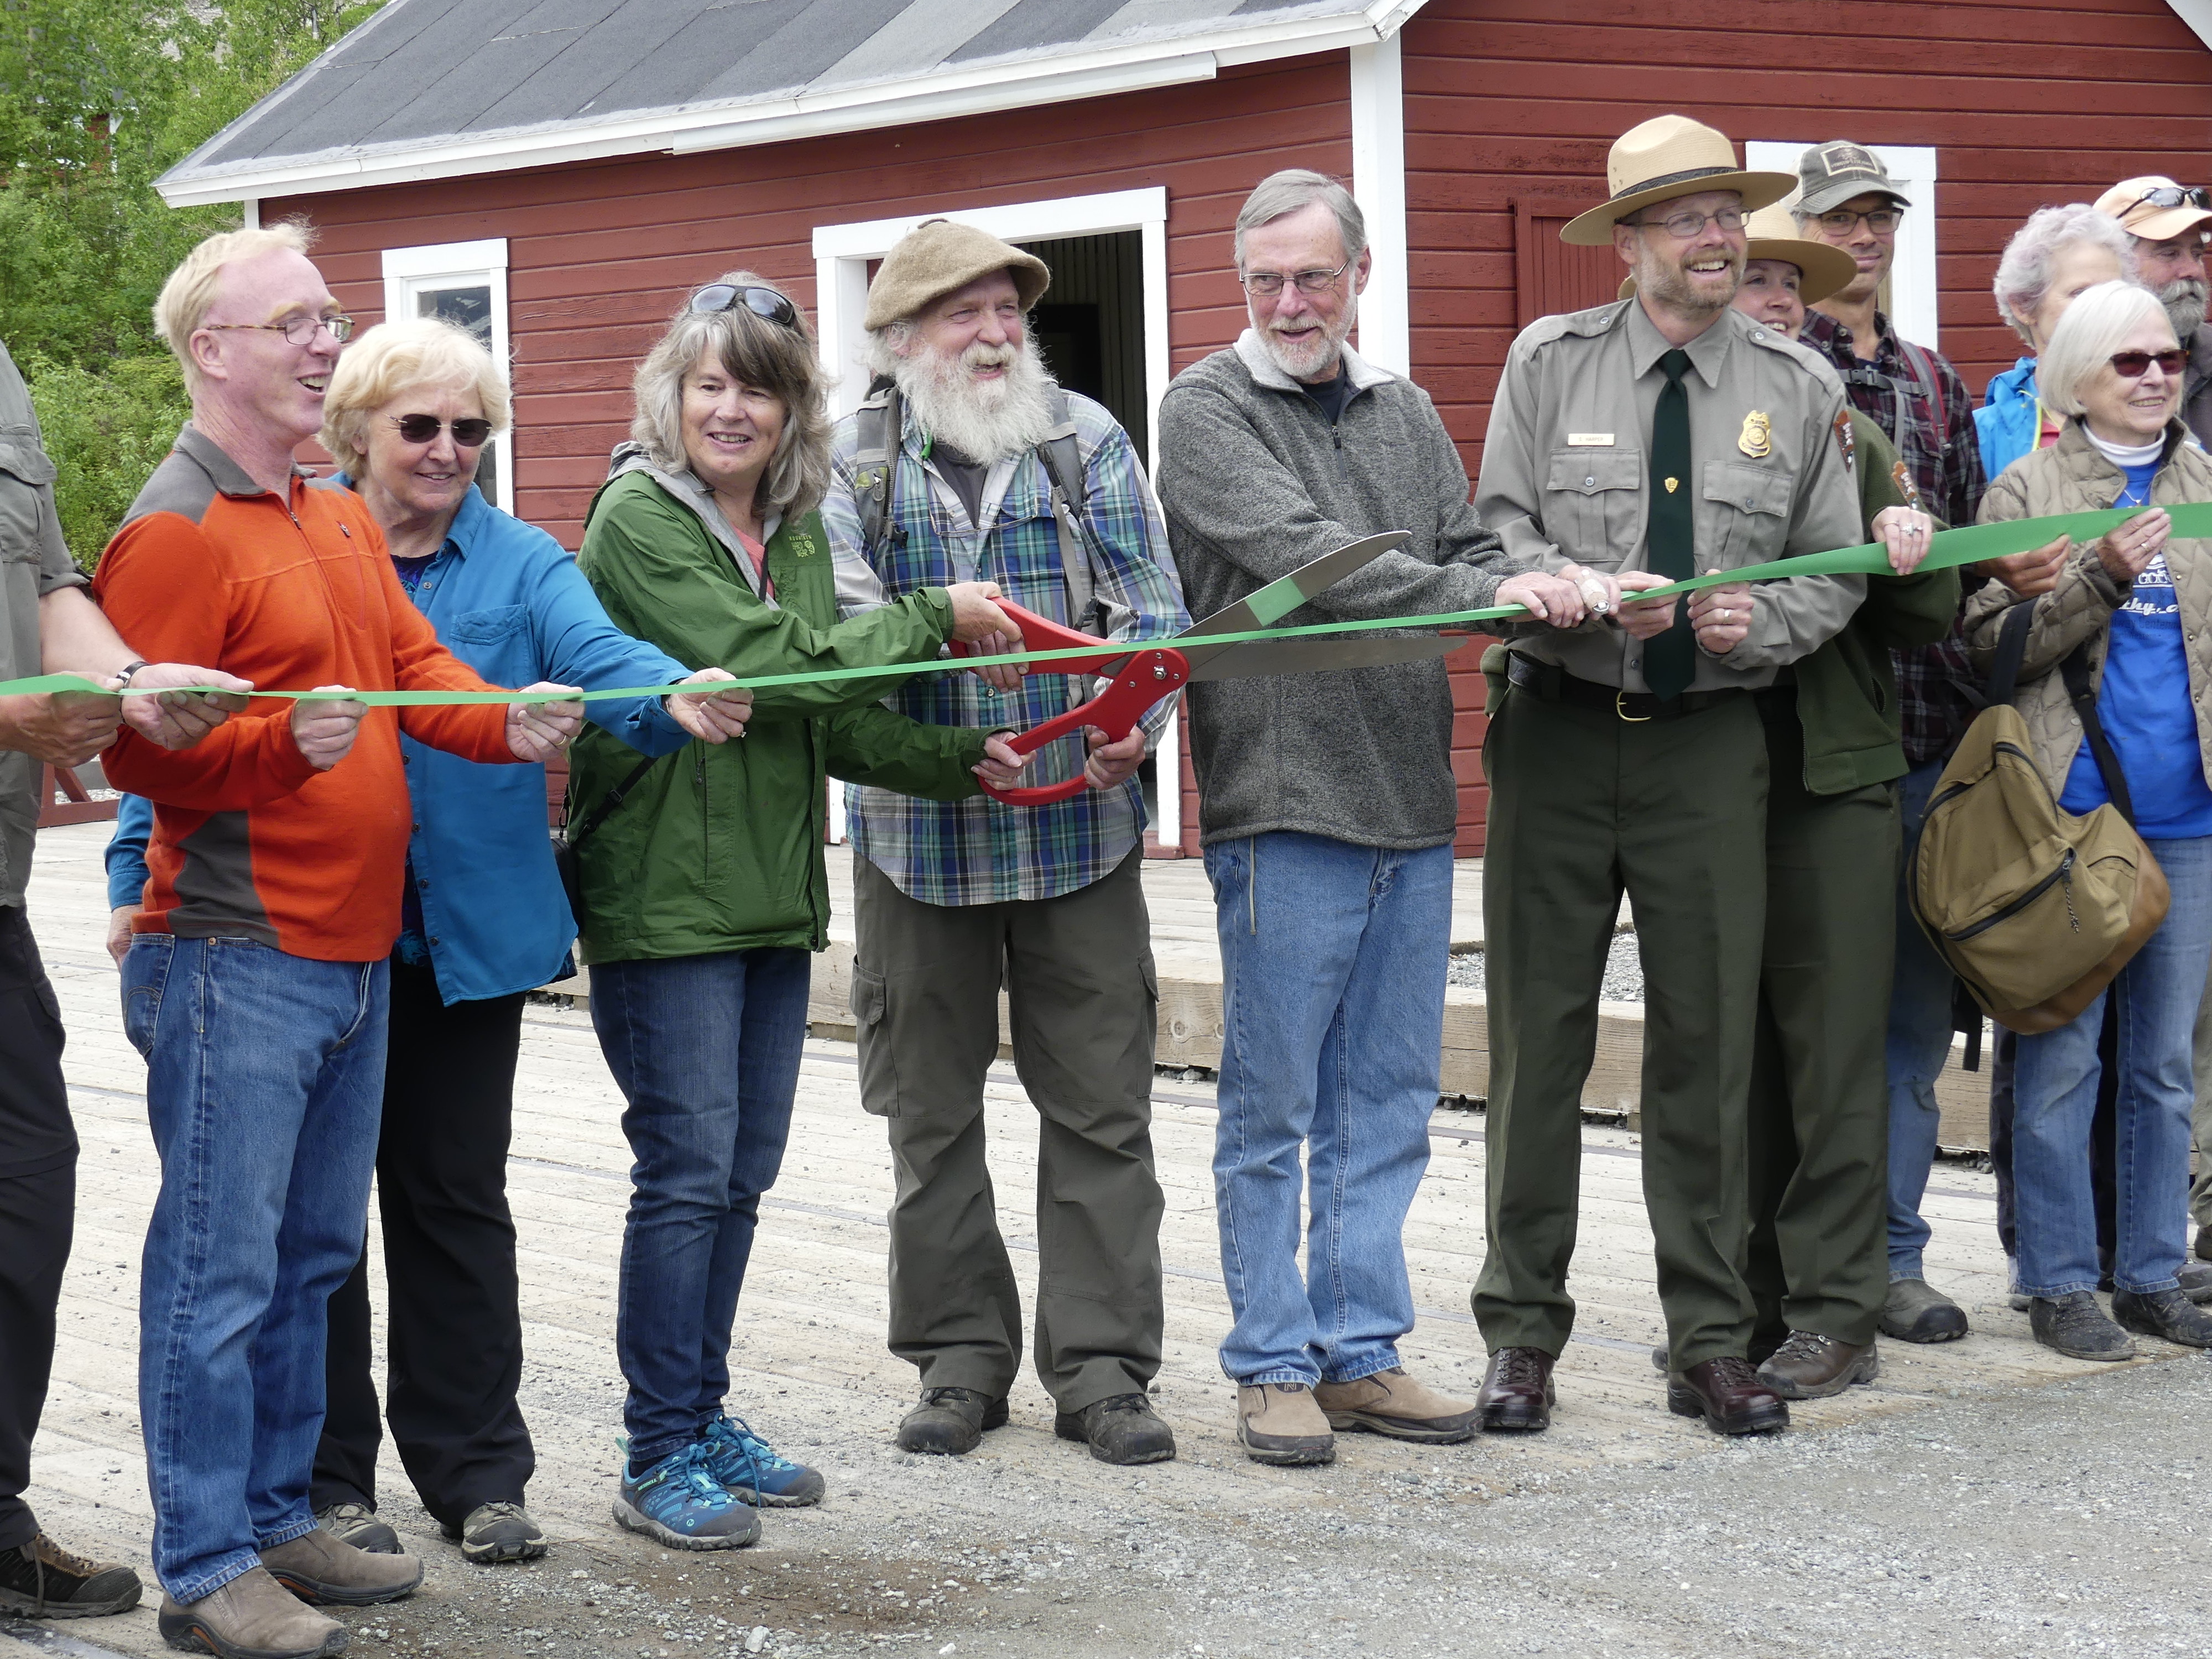 National Park Service Exhibit Specialist Carol Harding (now retired) cuts the ceremonial ribbon with the assistance of members of the McCarthy and Kennecott communities and present and former park staff.